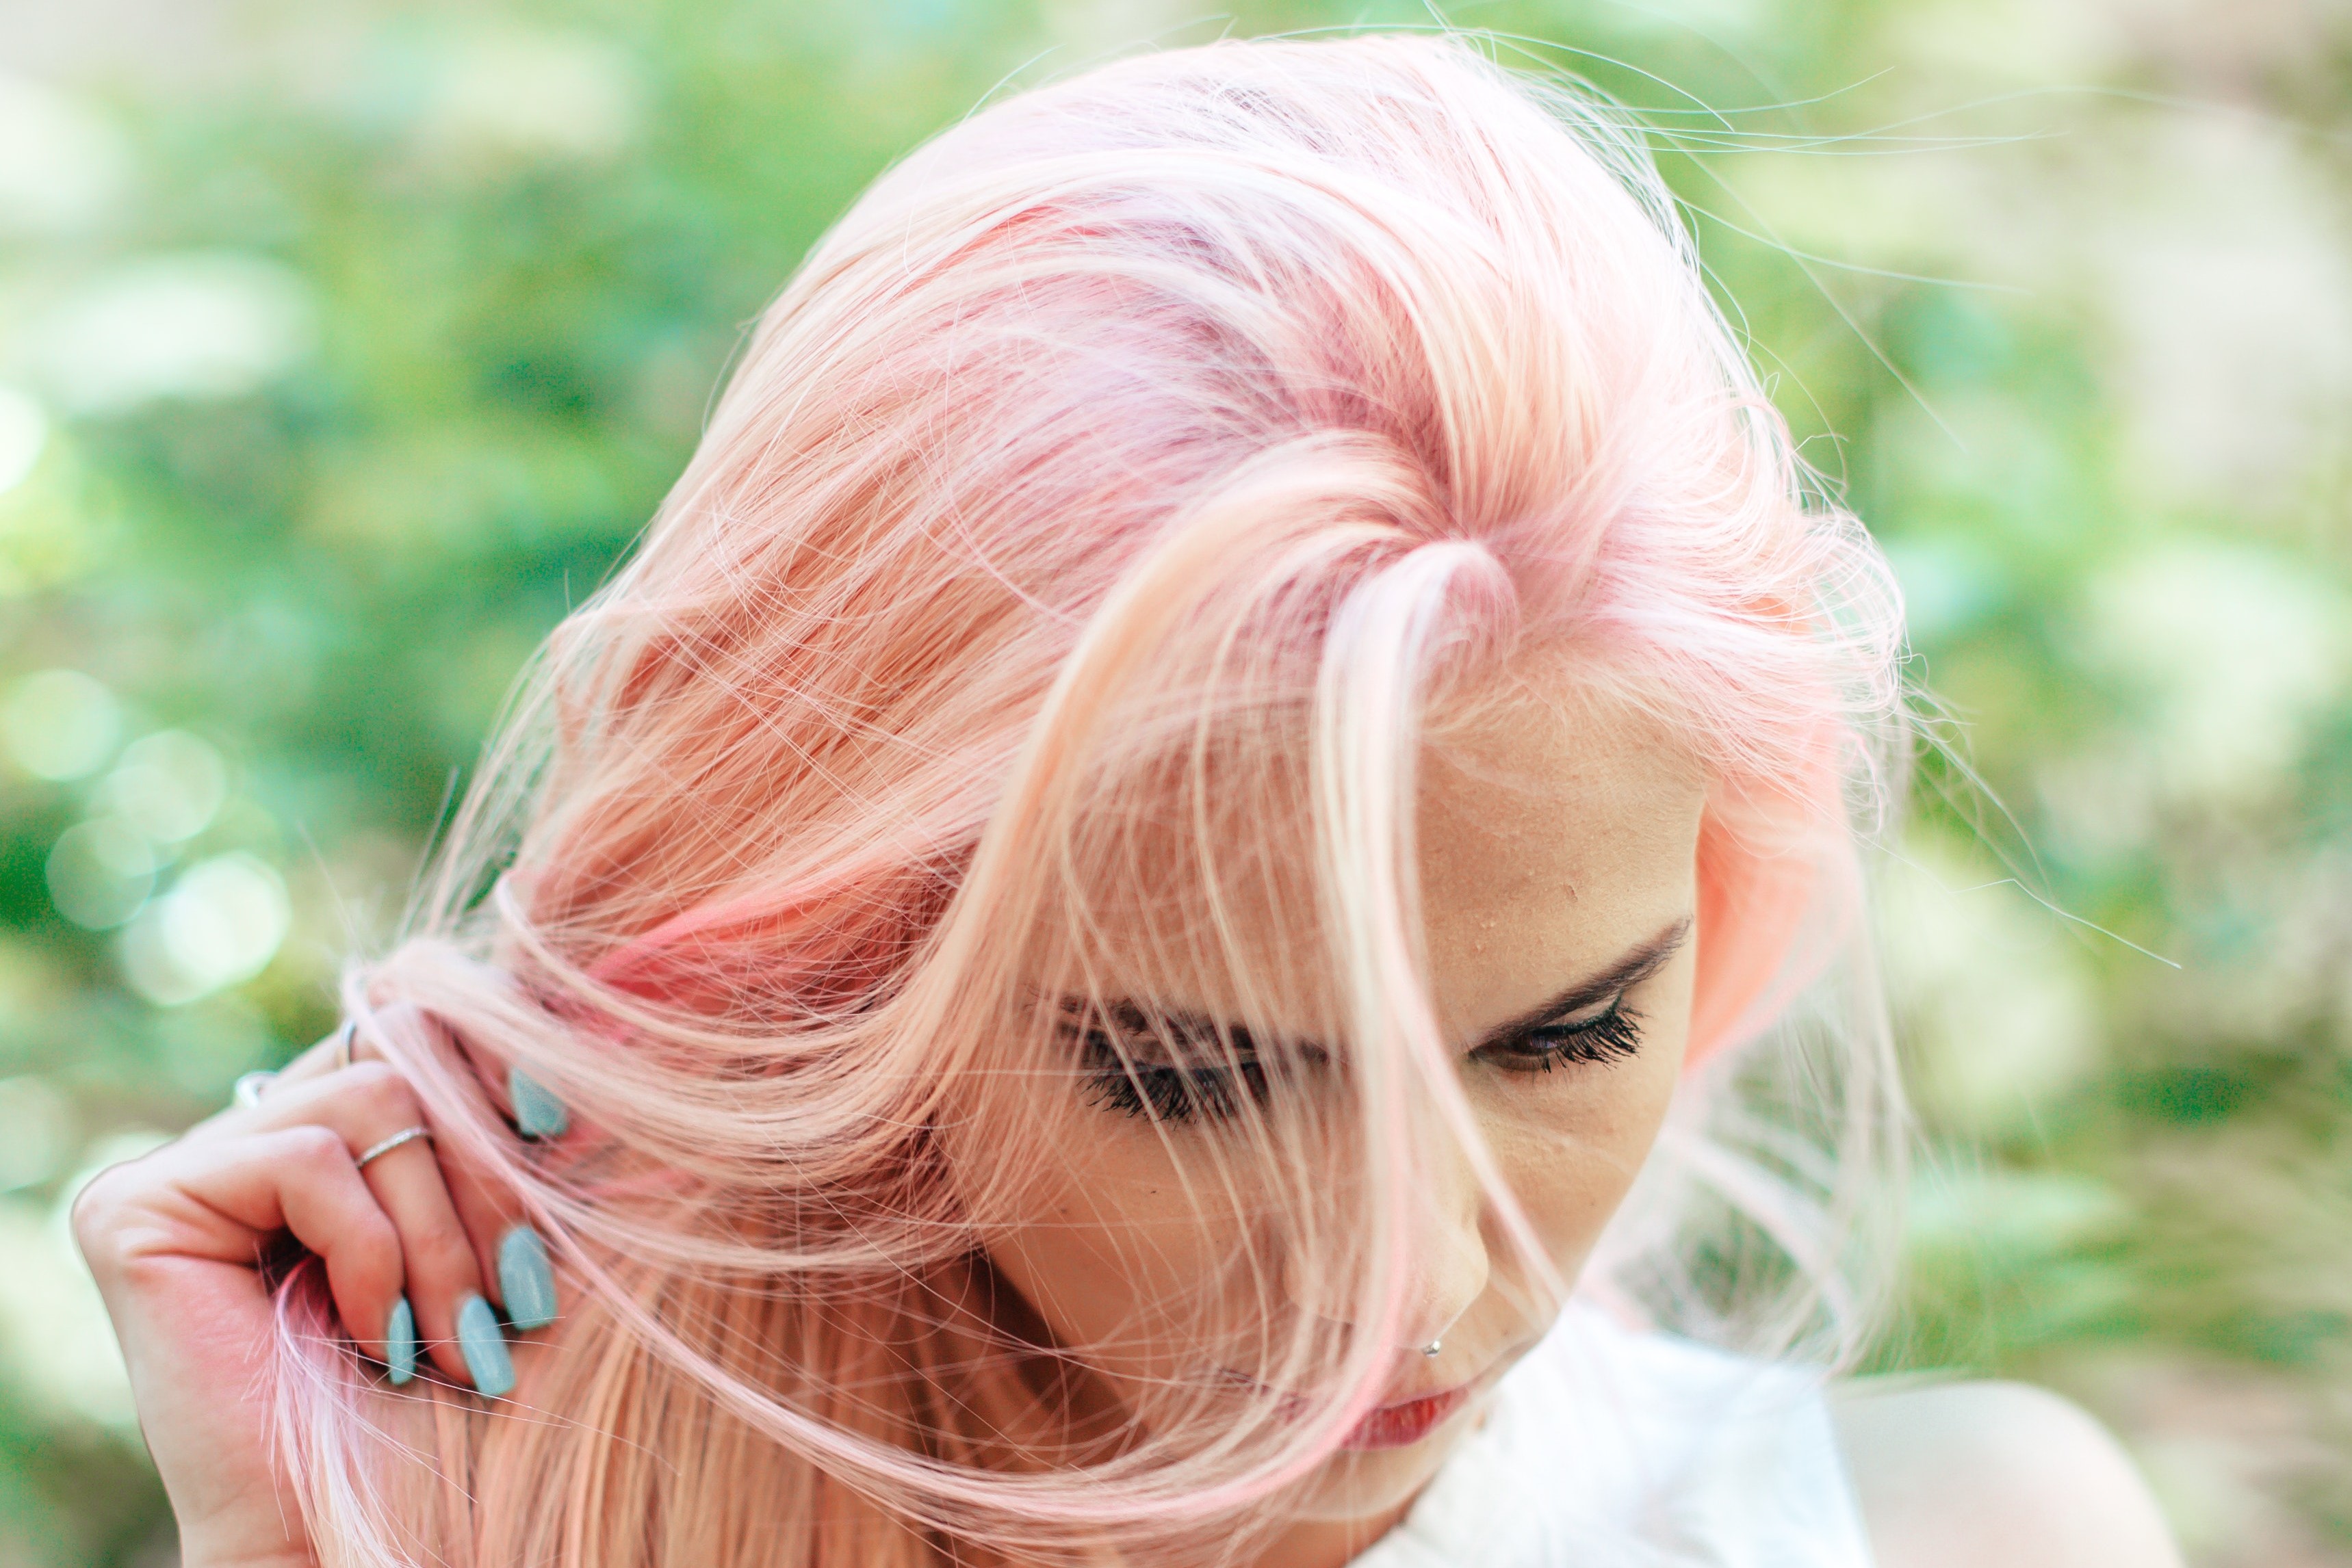 lady with pink hair looks sown whilst holding hair hair in her finger tips